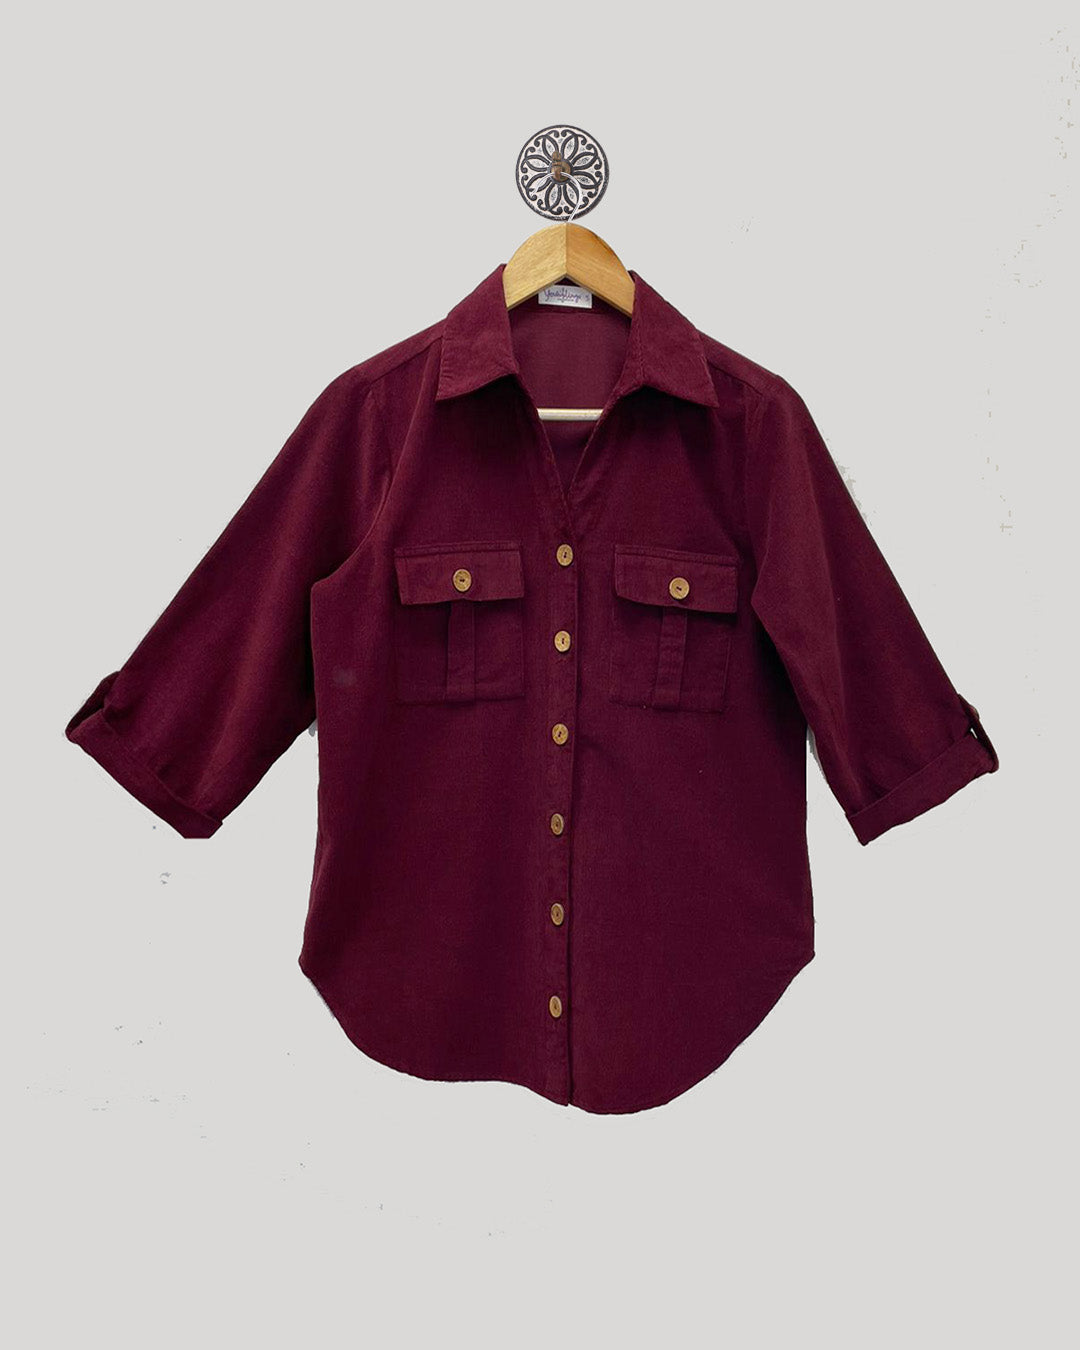 CORDUROY SHIRT WITH WOODEN BUTTONS